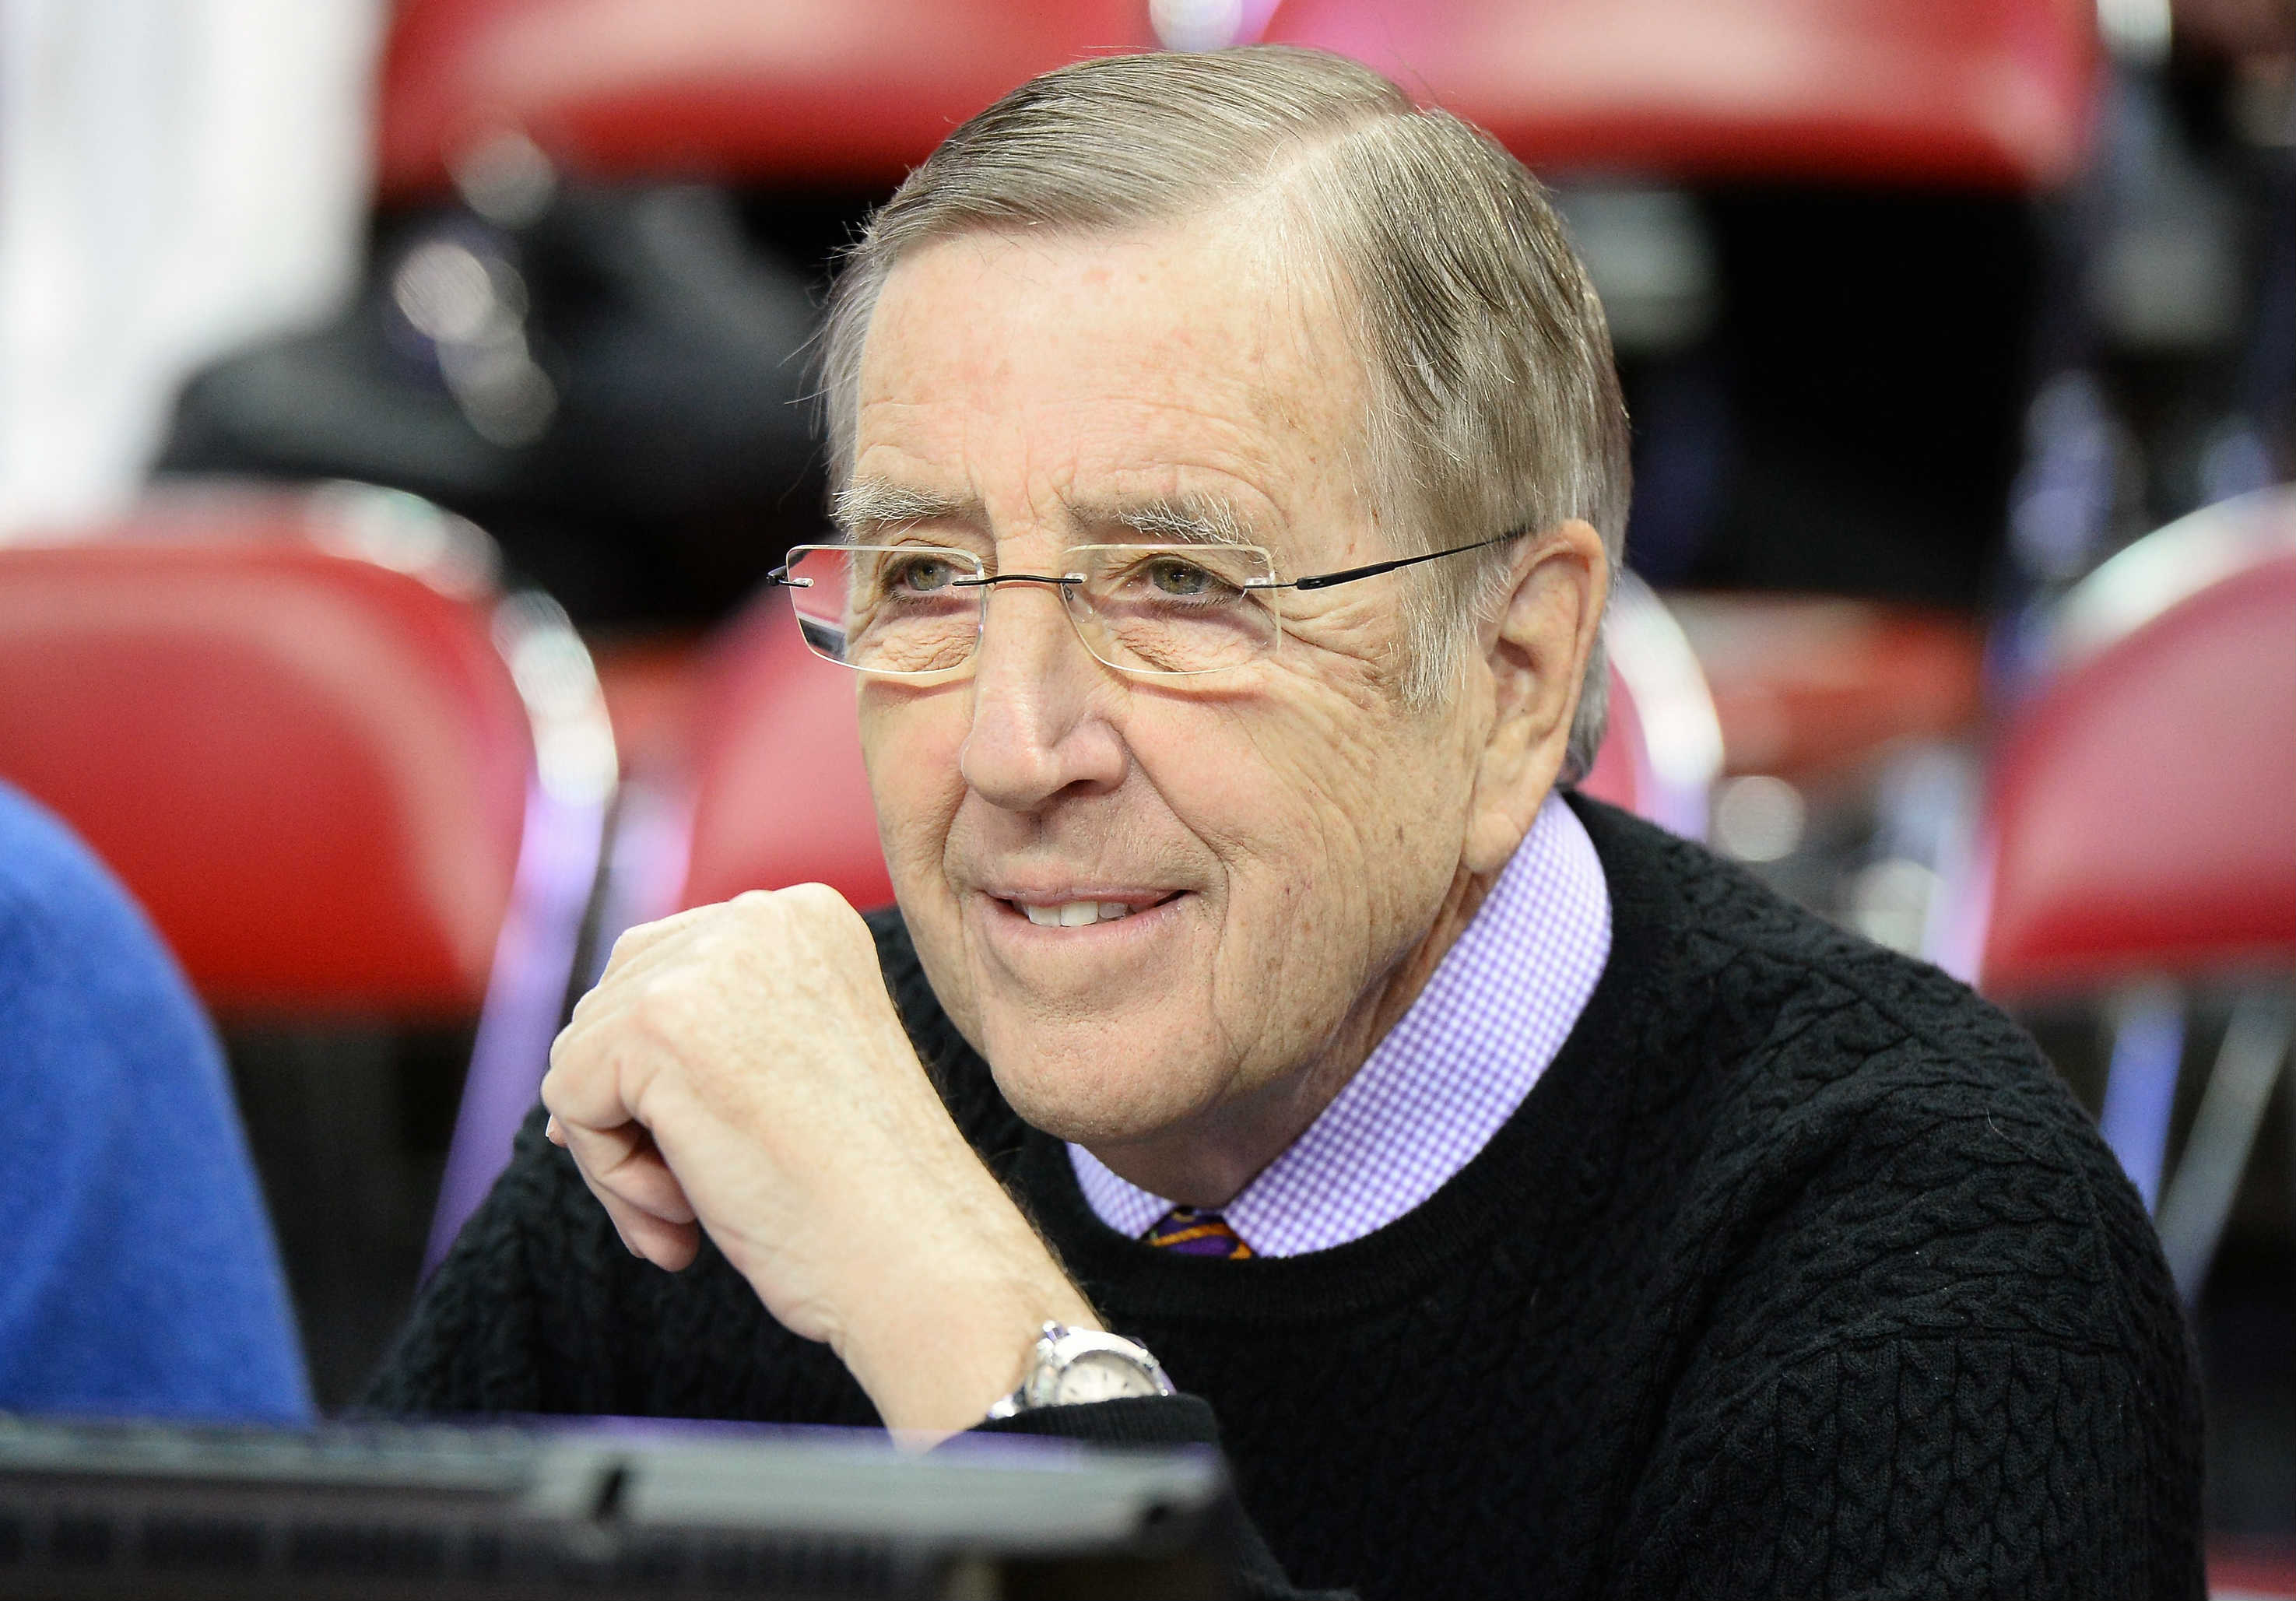 Brent Musburger doesn't want to hear complaints about violence in football